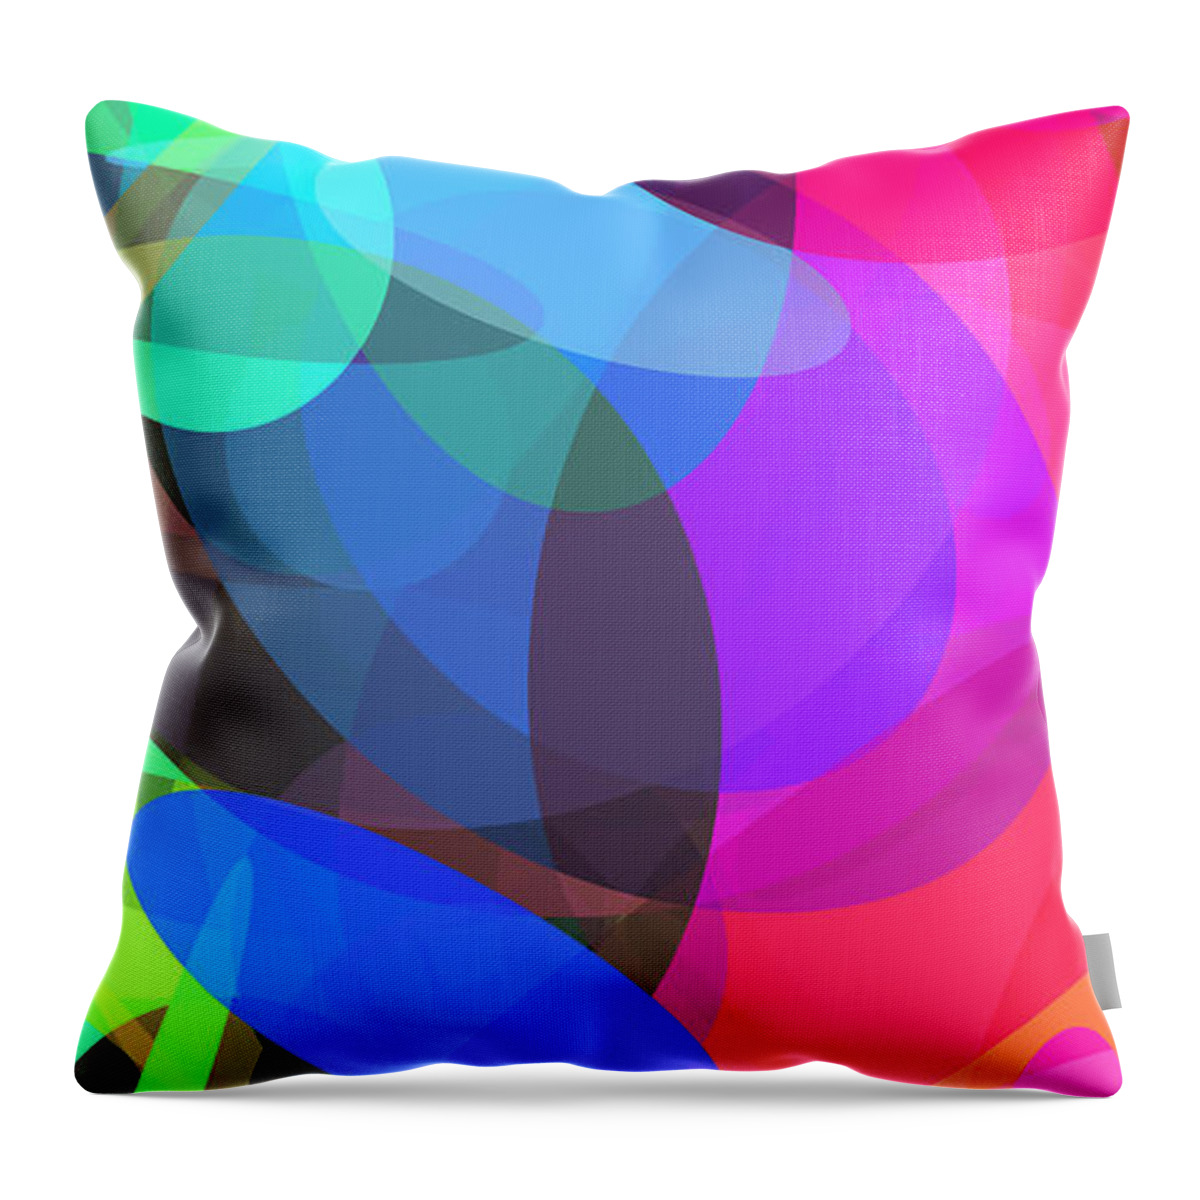 Ellipse Throw Pillow featuring the digital art Ellipses 3 by Chris Butler